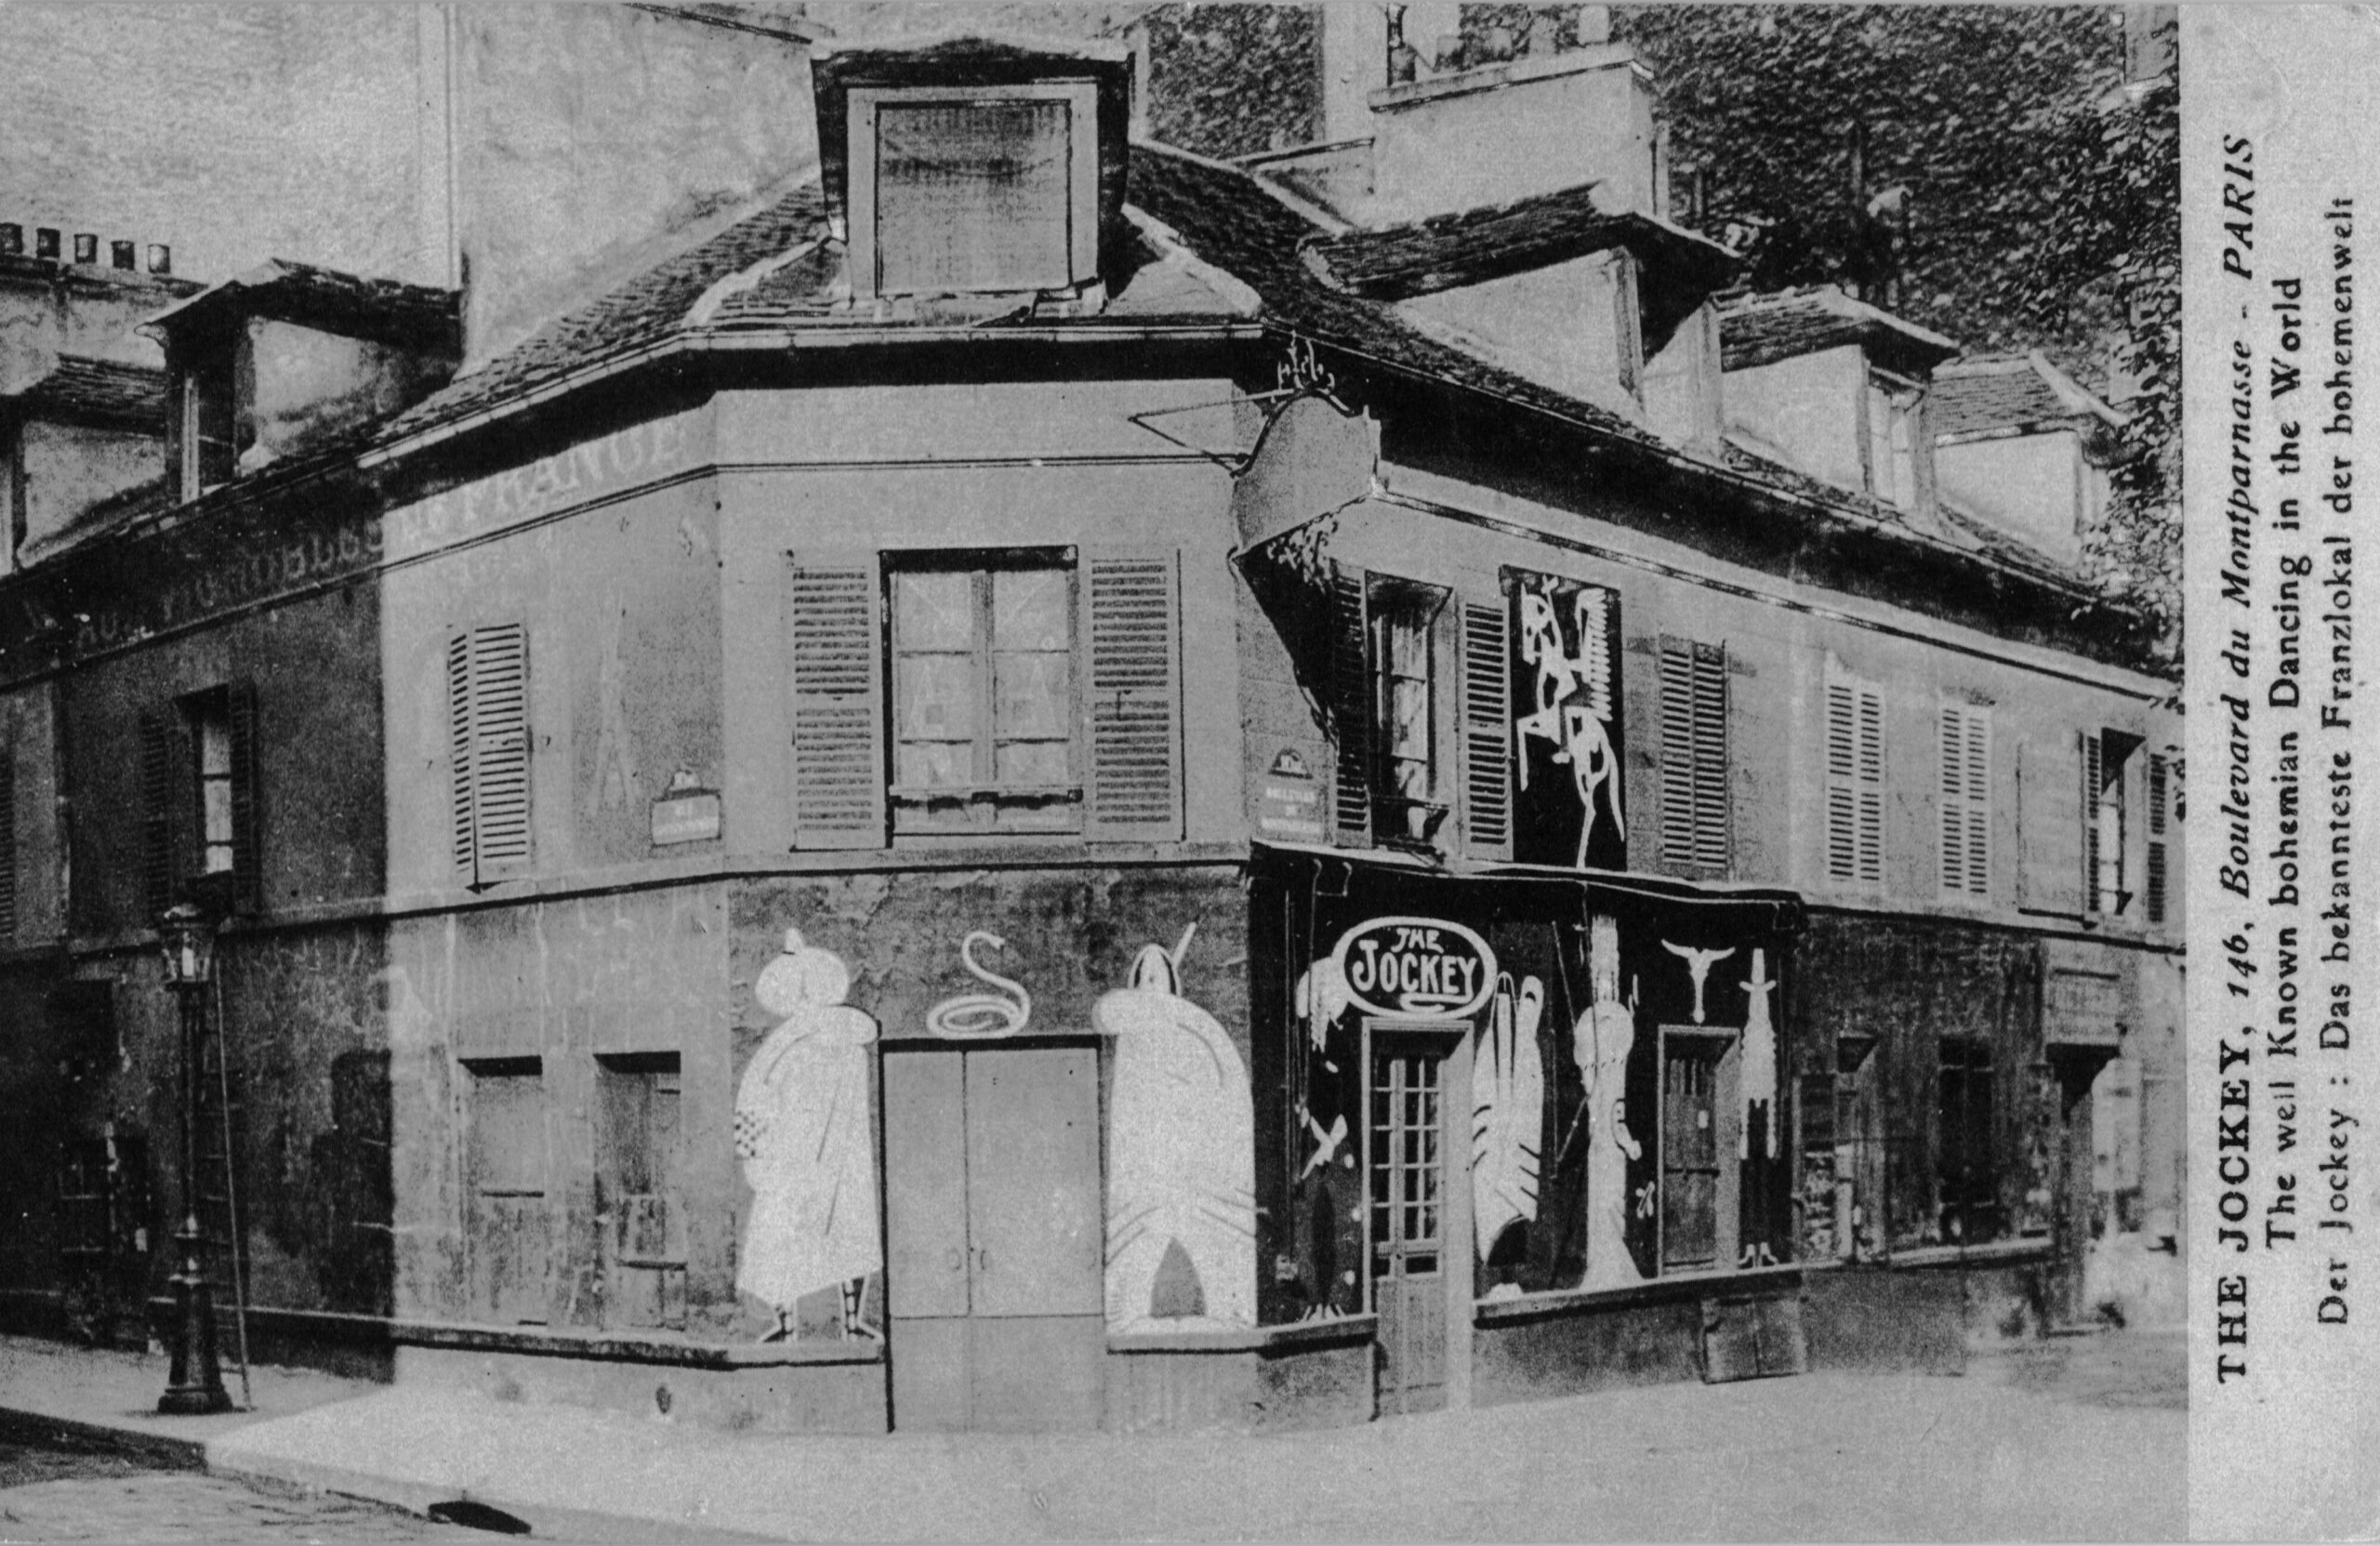 Black-and-white photograph of a corner building with murals painted on either side of a door way over which hangs a sign reading "The Jockey"